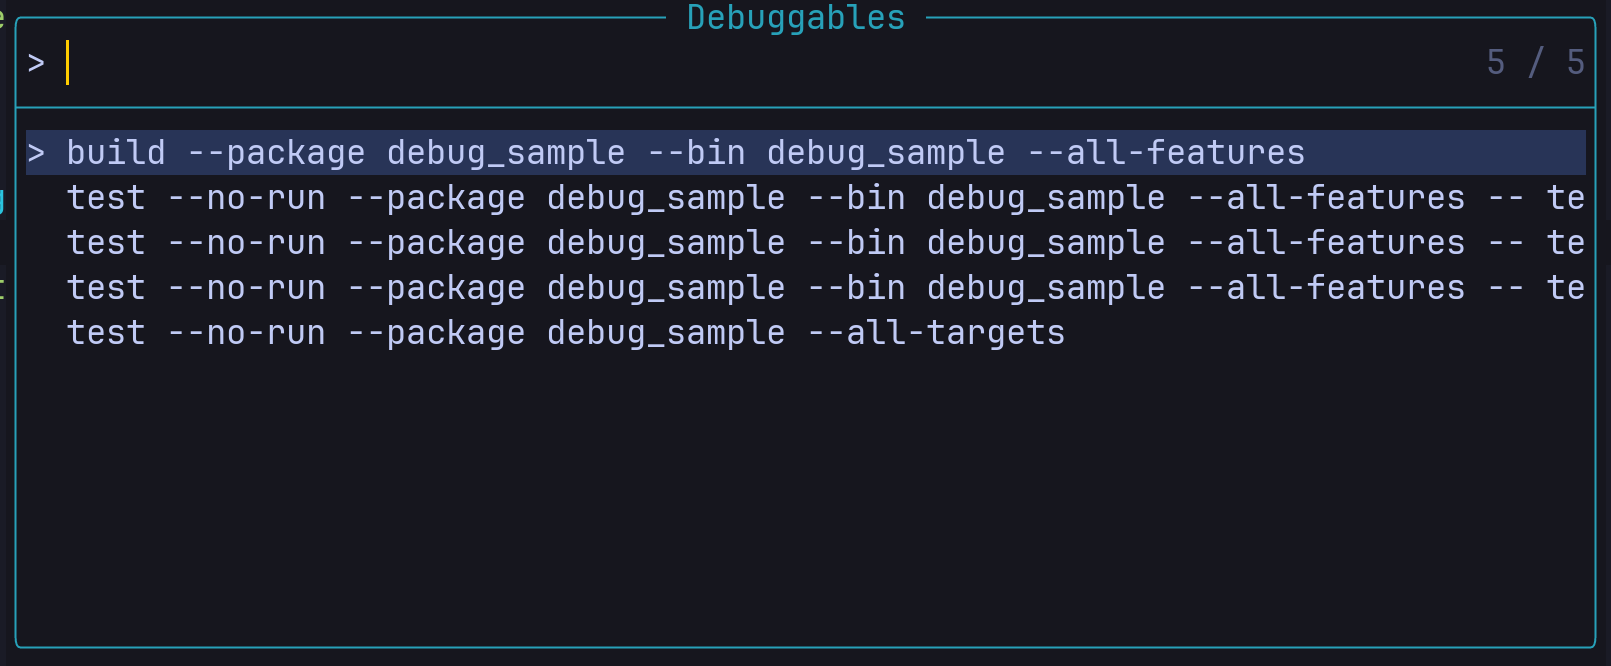 A list of options that can be run that the RustDebuggables command discovered, this list is displayed using the Telescope plugin which provides a prettier visualisation (albeit cuts off some of the text on long strings)